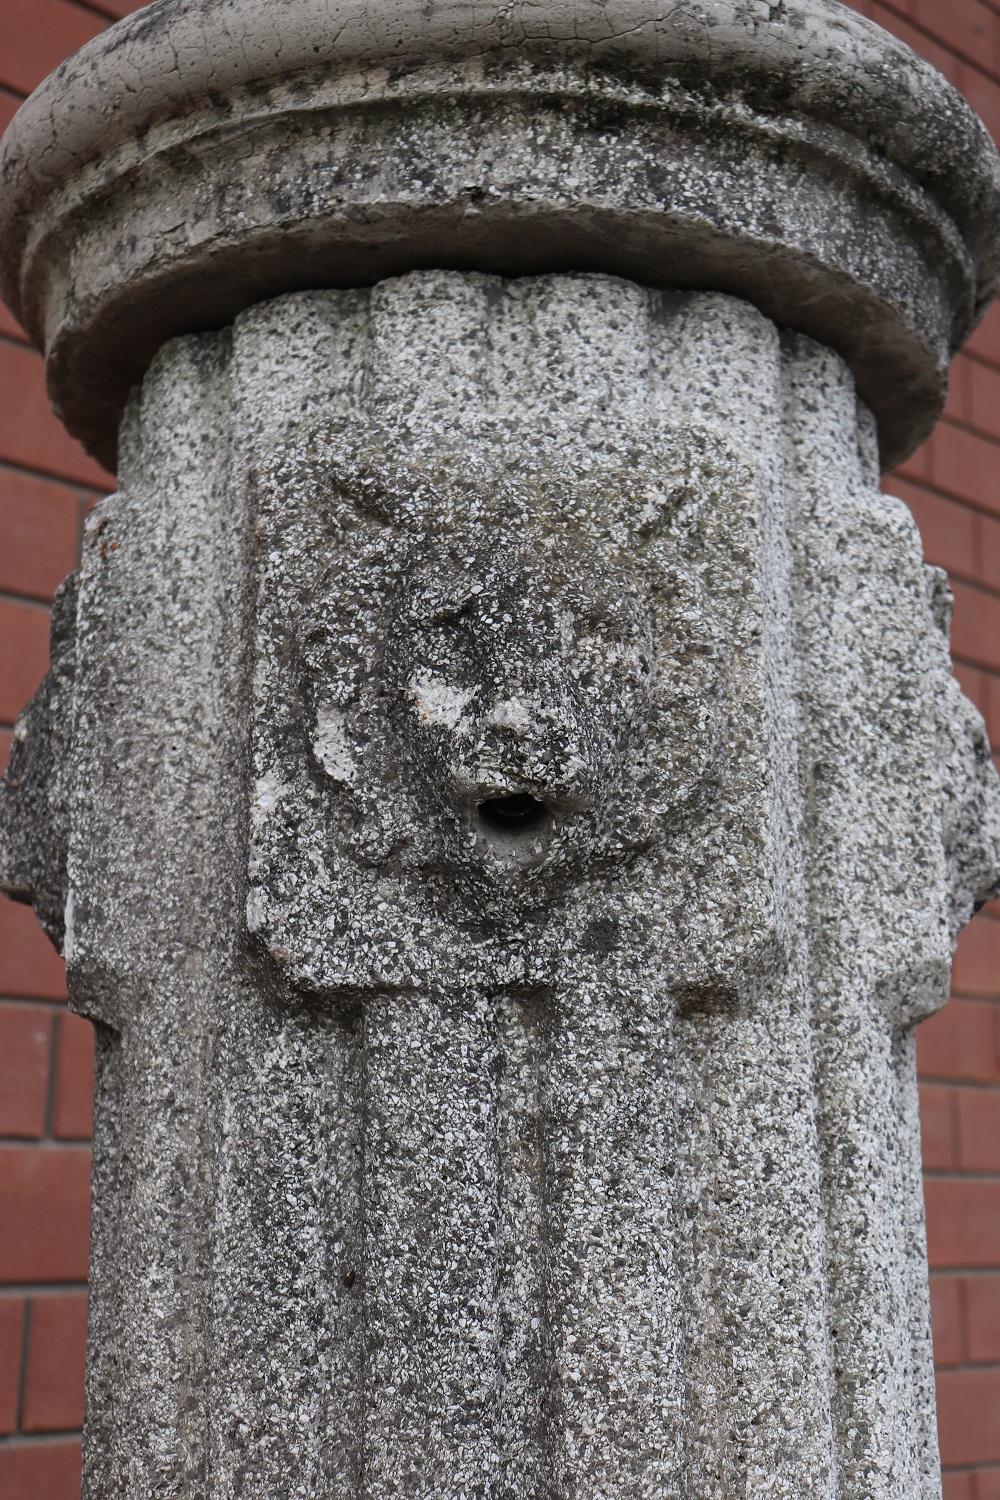 Beautiful refined garden fountain in neoclassical style, circa 1930s main material stone mixed with gravel and cement. Four beautiful lion heads from which water comes out. The stone shows signs of the passage of time. This fountain is perfect for